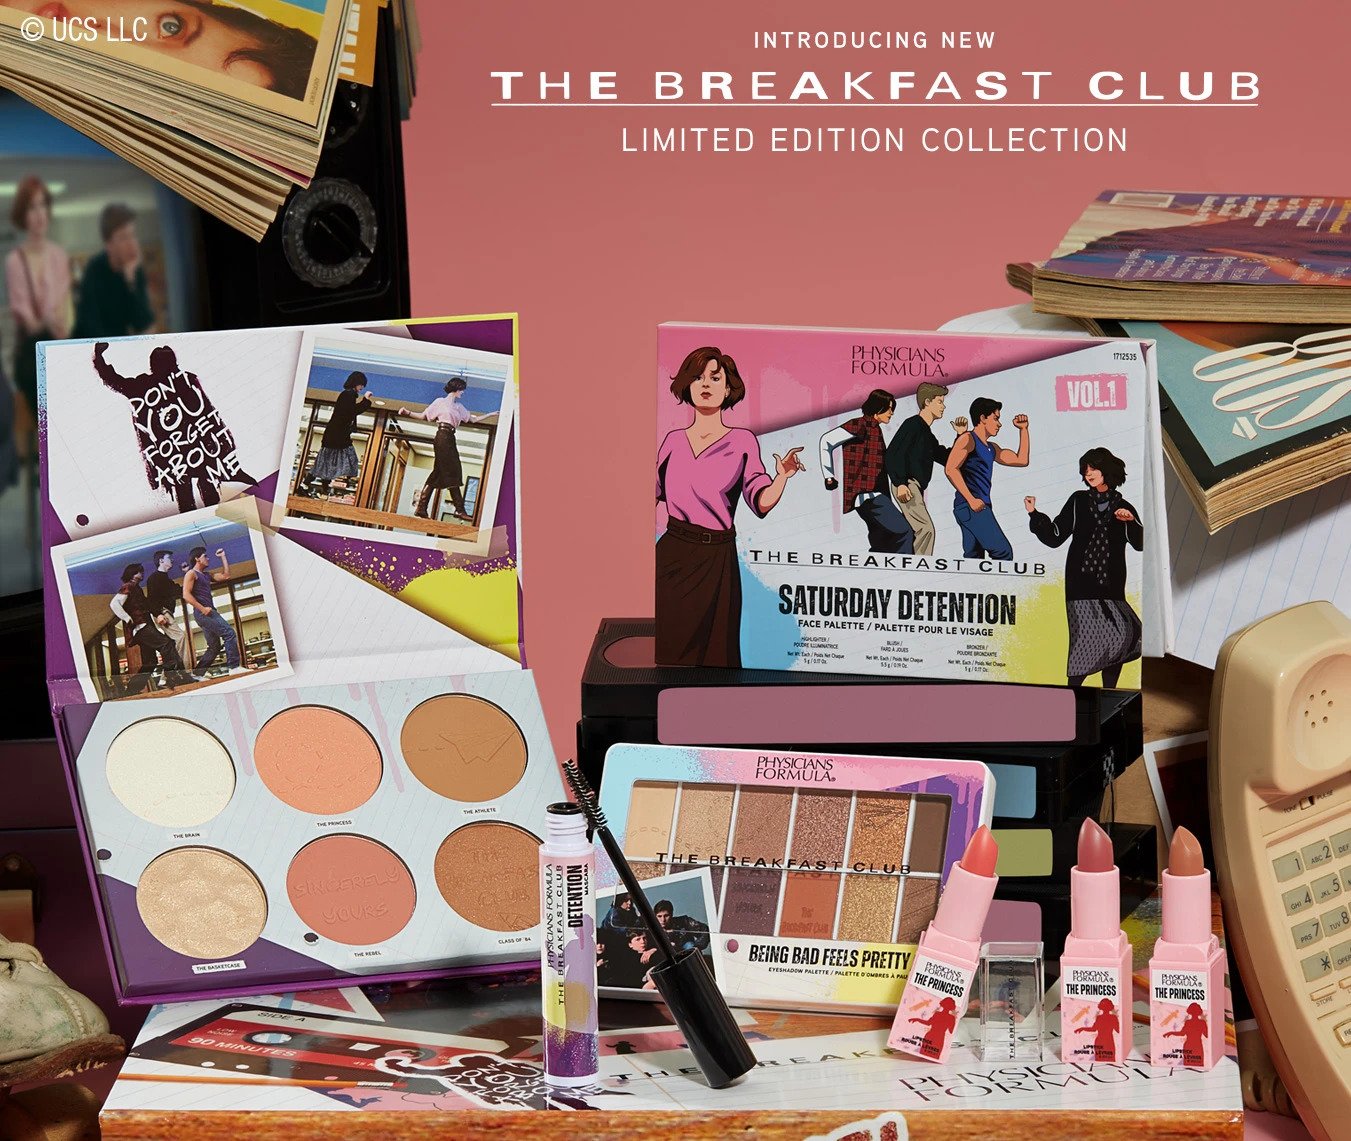 Introducing New The Breakfast Club - Limited Edition Collection